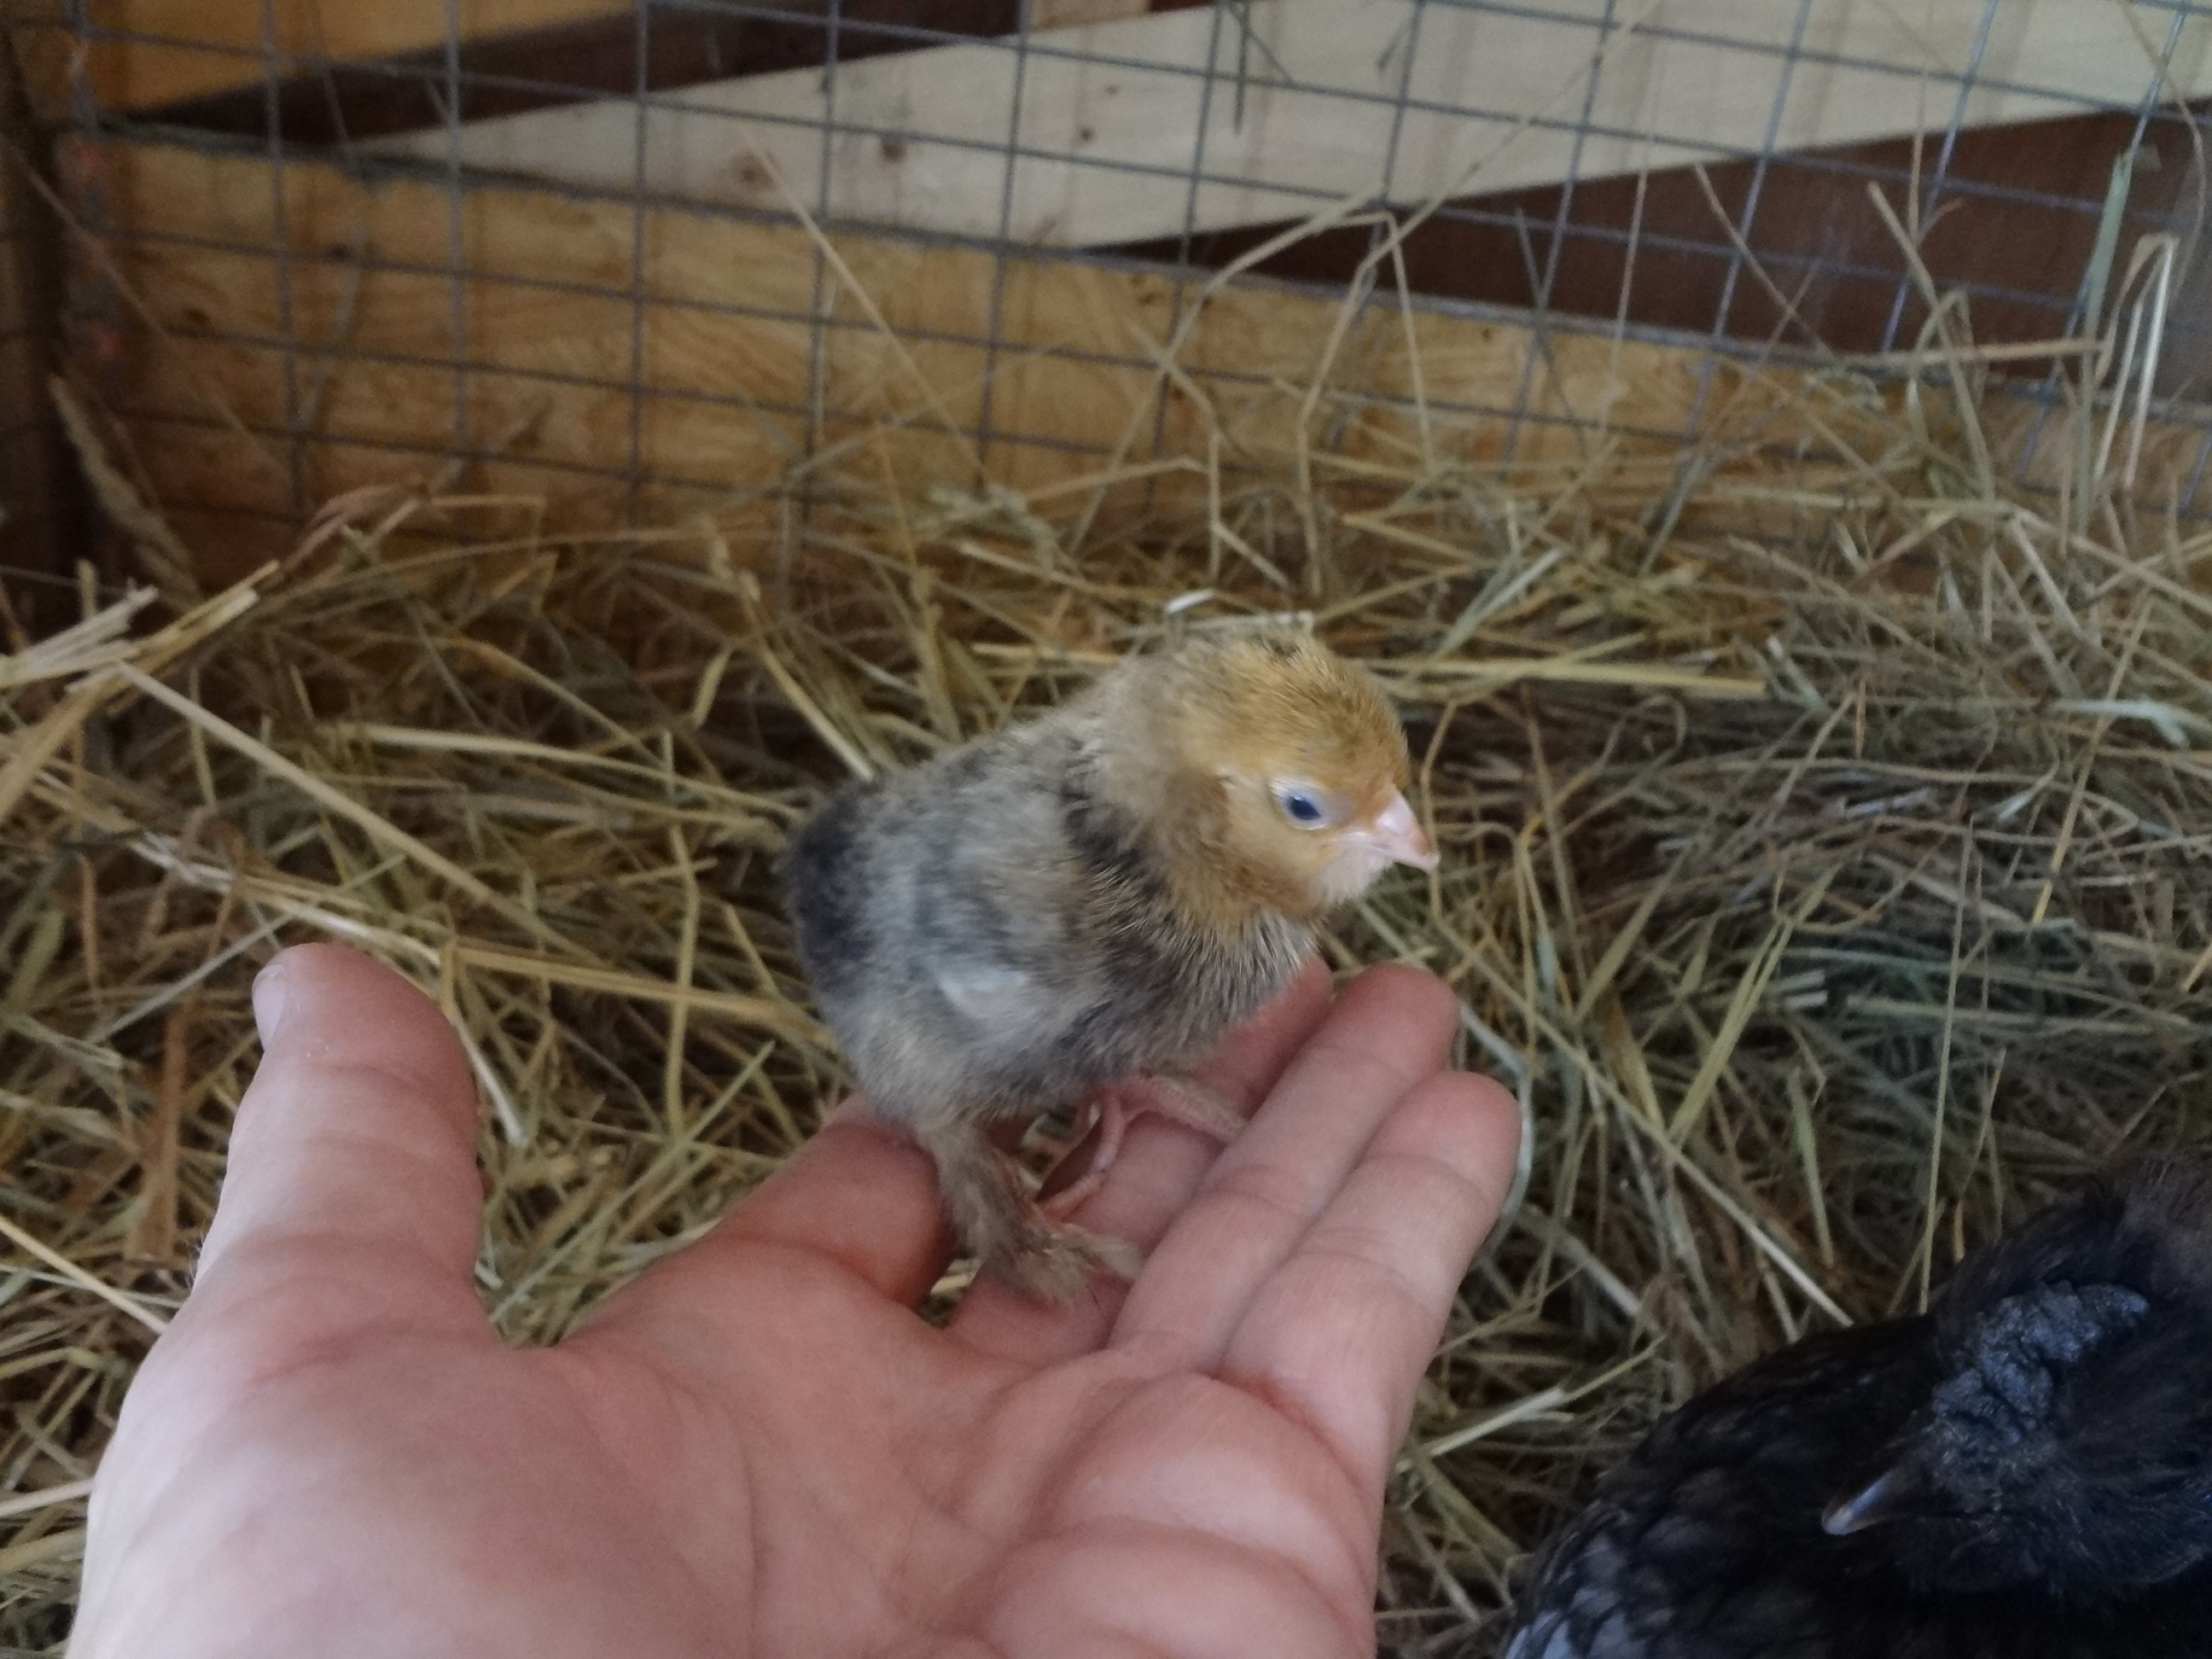 the d'uccle chick hatched by my broody hen